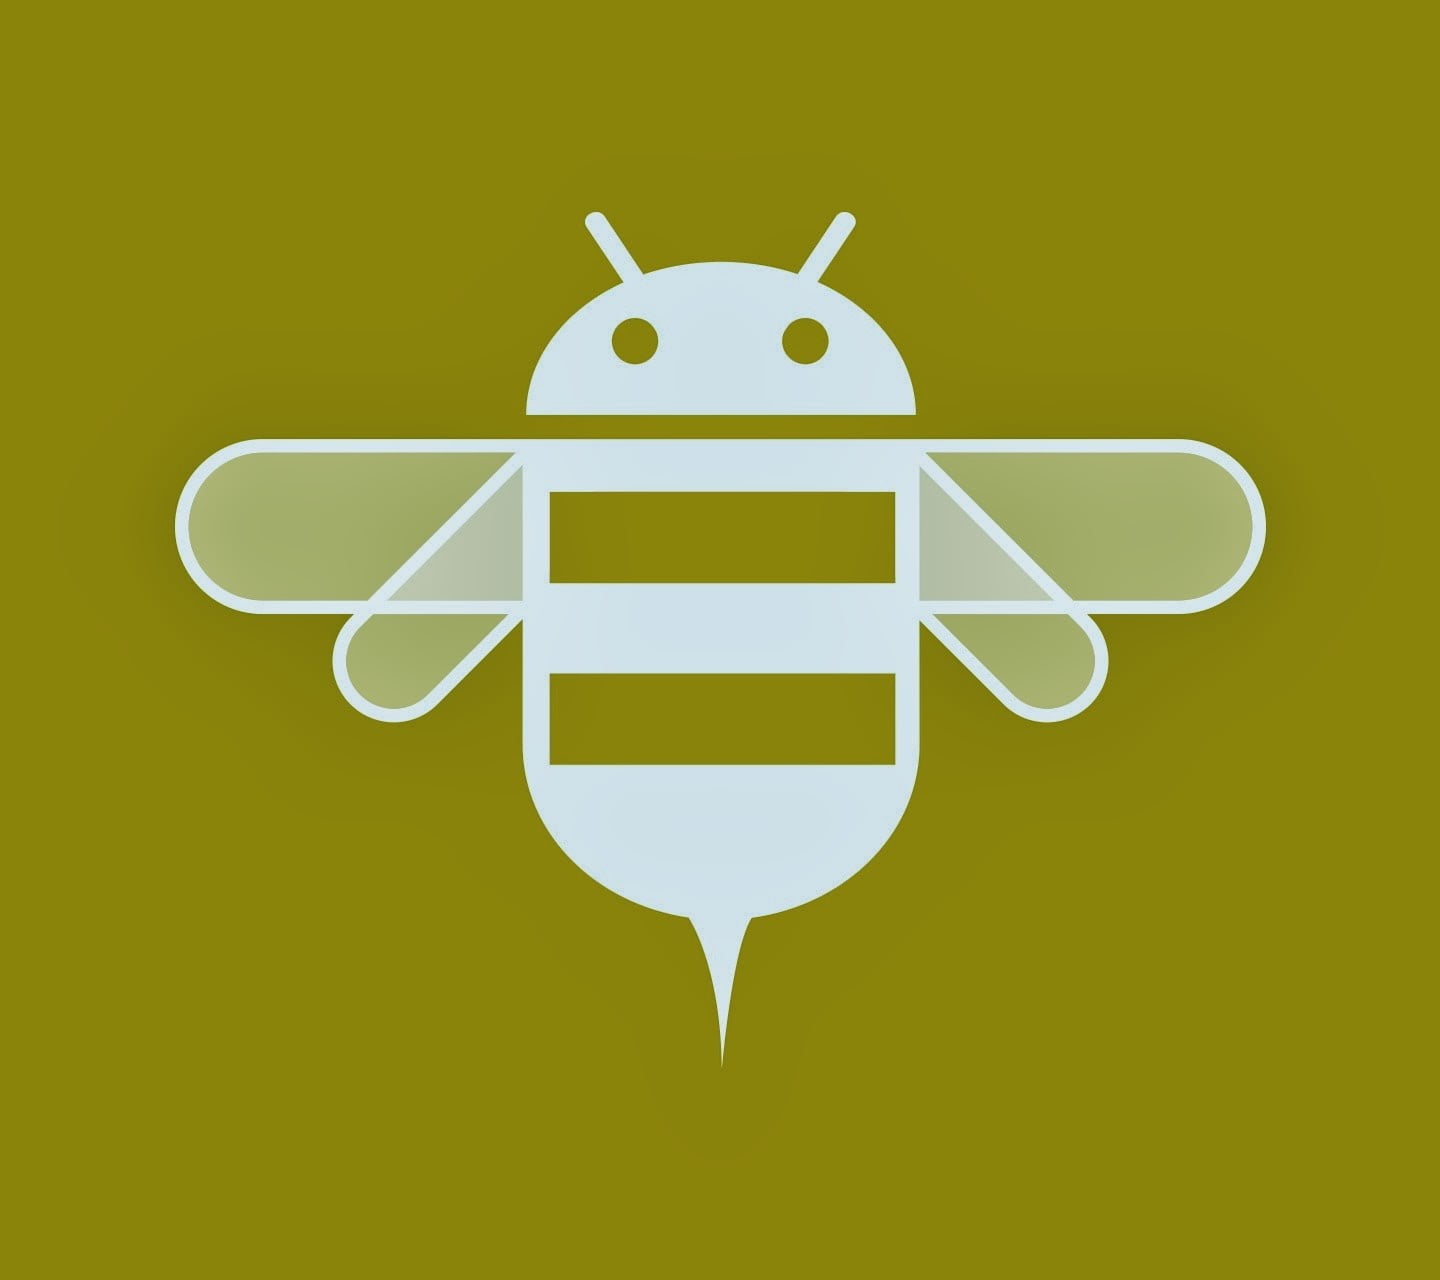 bee illustrtion, Android (operating system), honeycombs, yellow